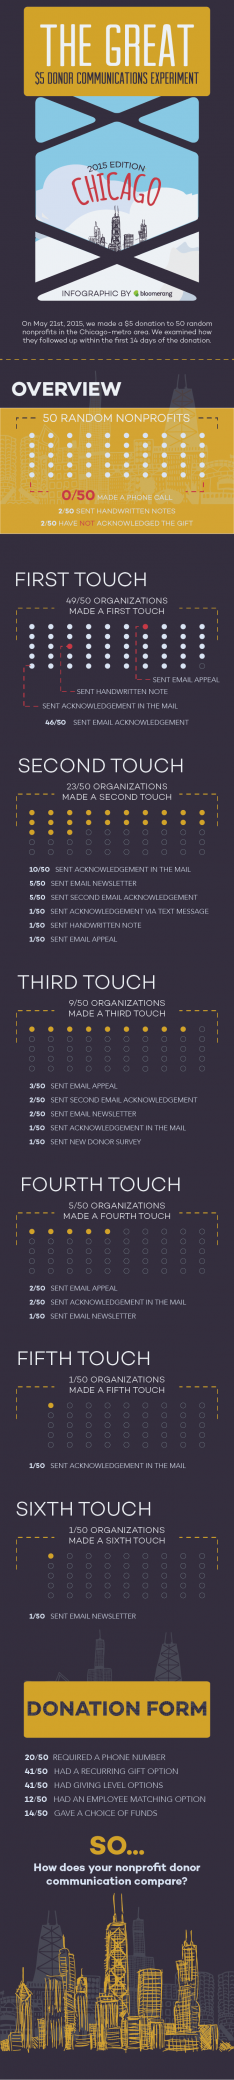 2015 $5 Donor Communications experiment [Infographic]